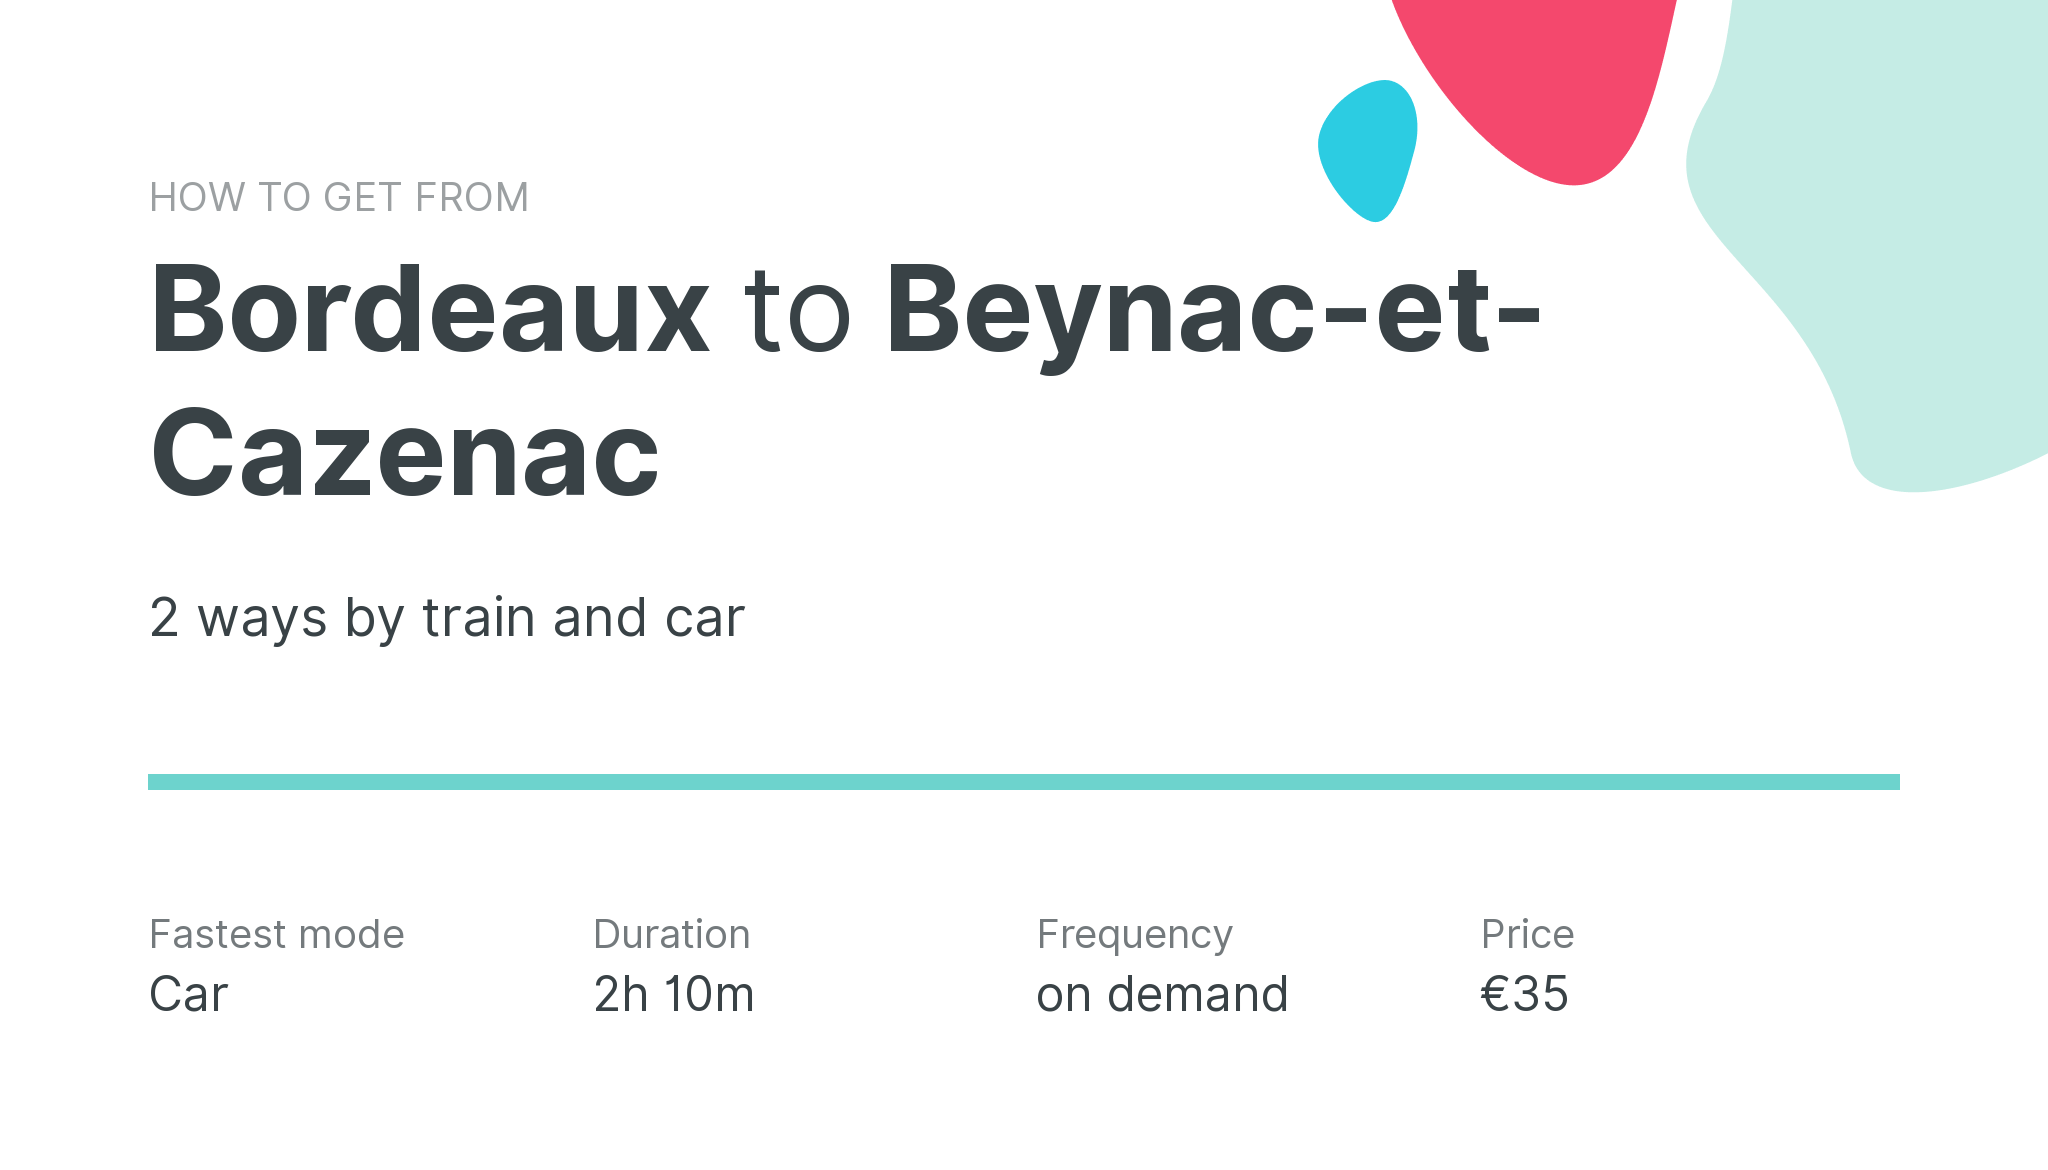 How do I get from Bordeaux to Beynac-et-Cazenac